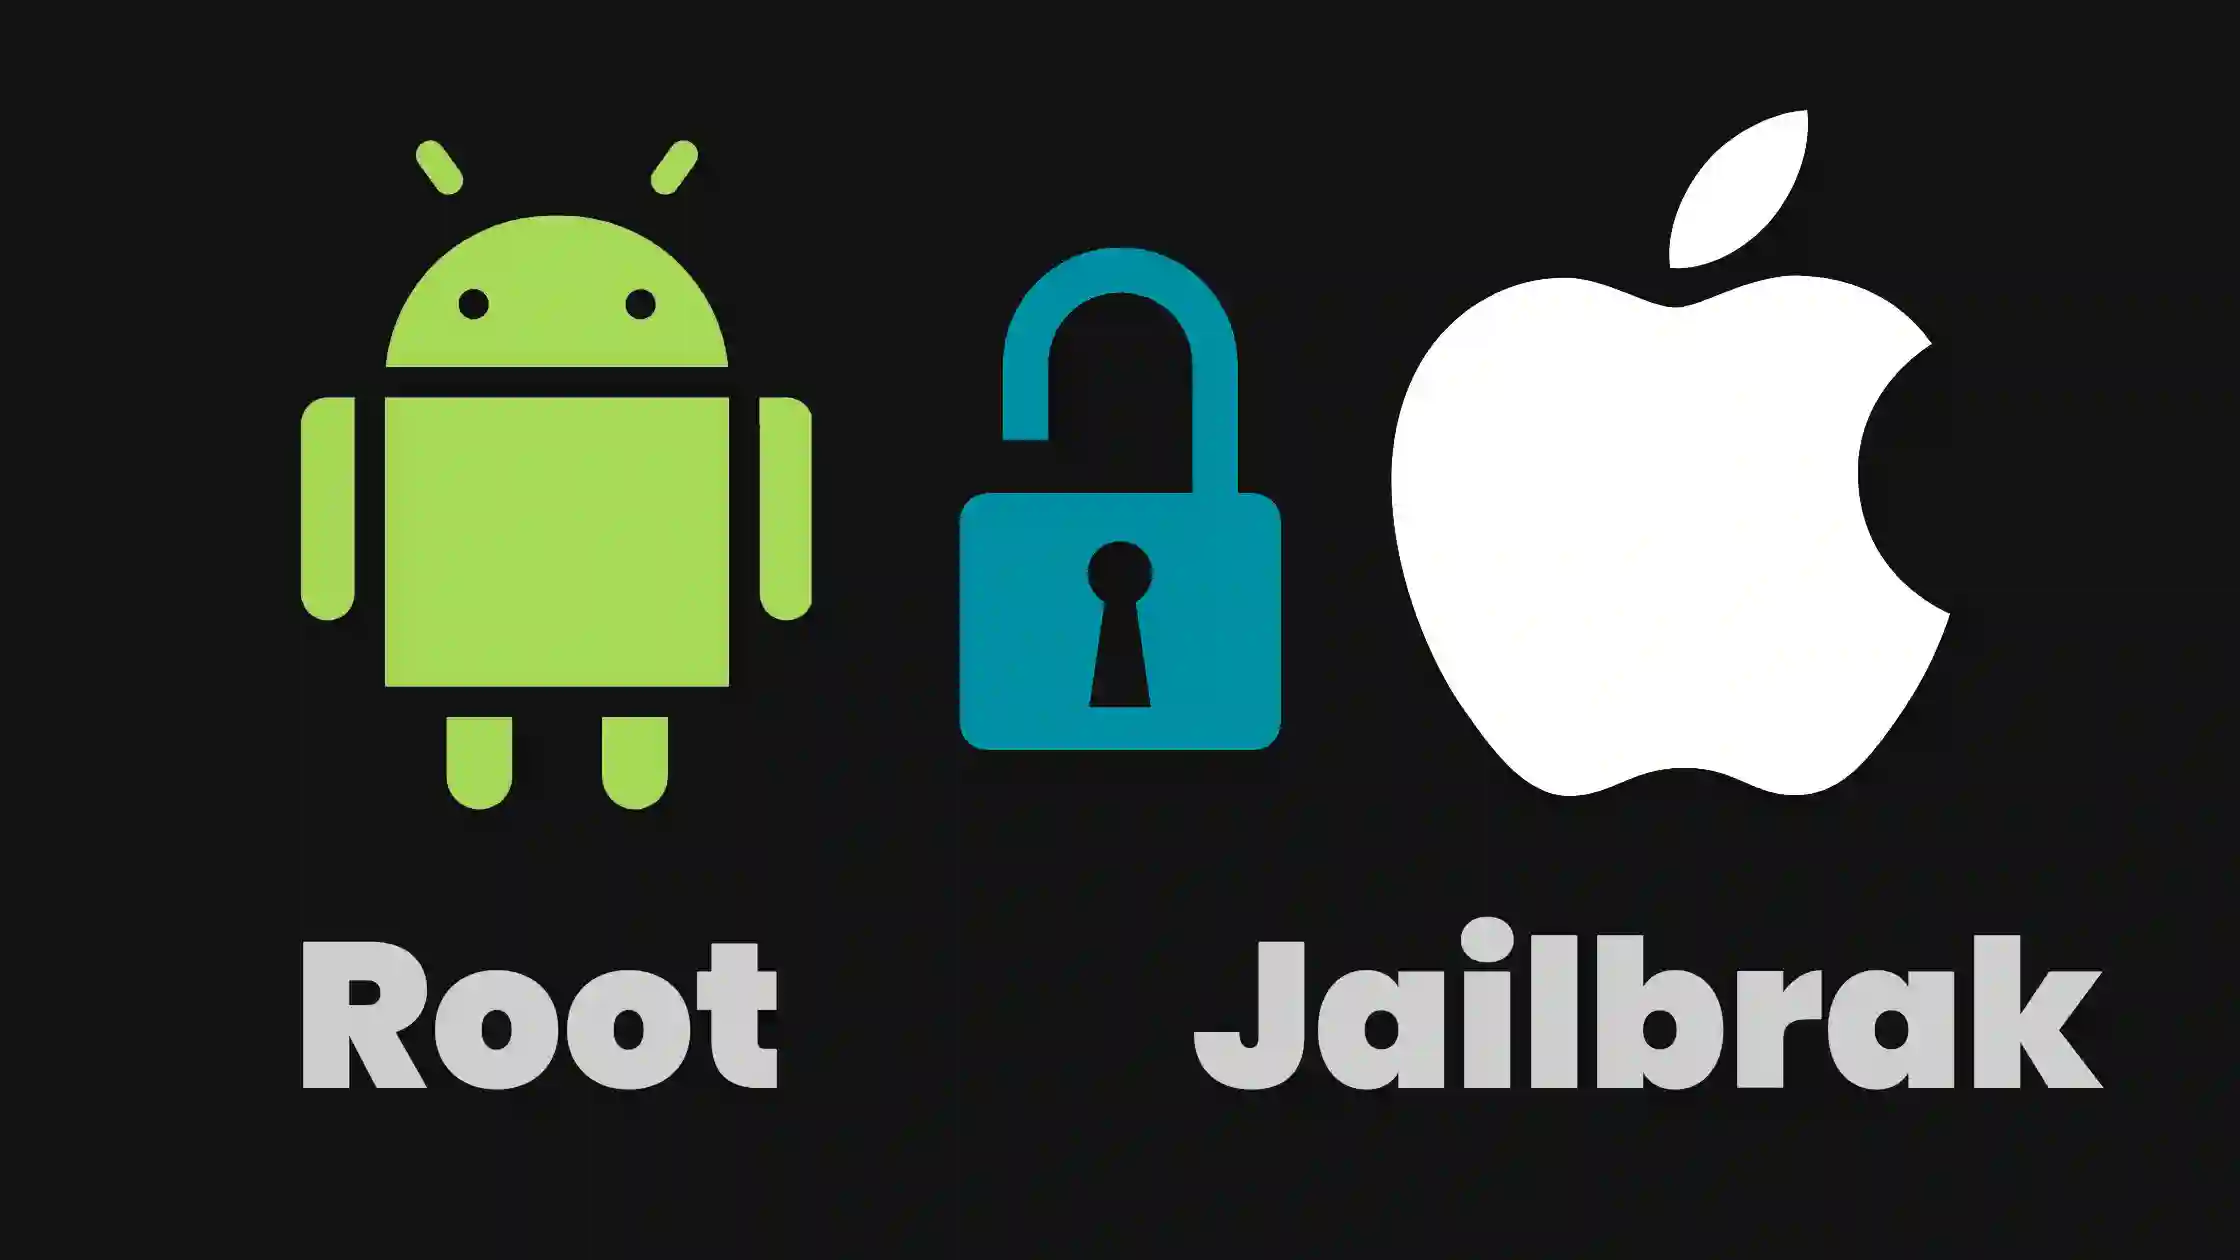 What is Root and Jailbreak